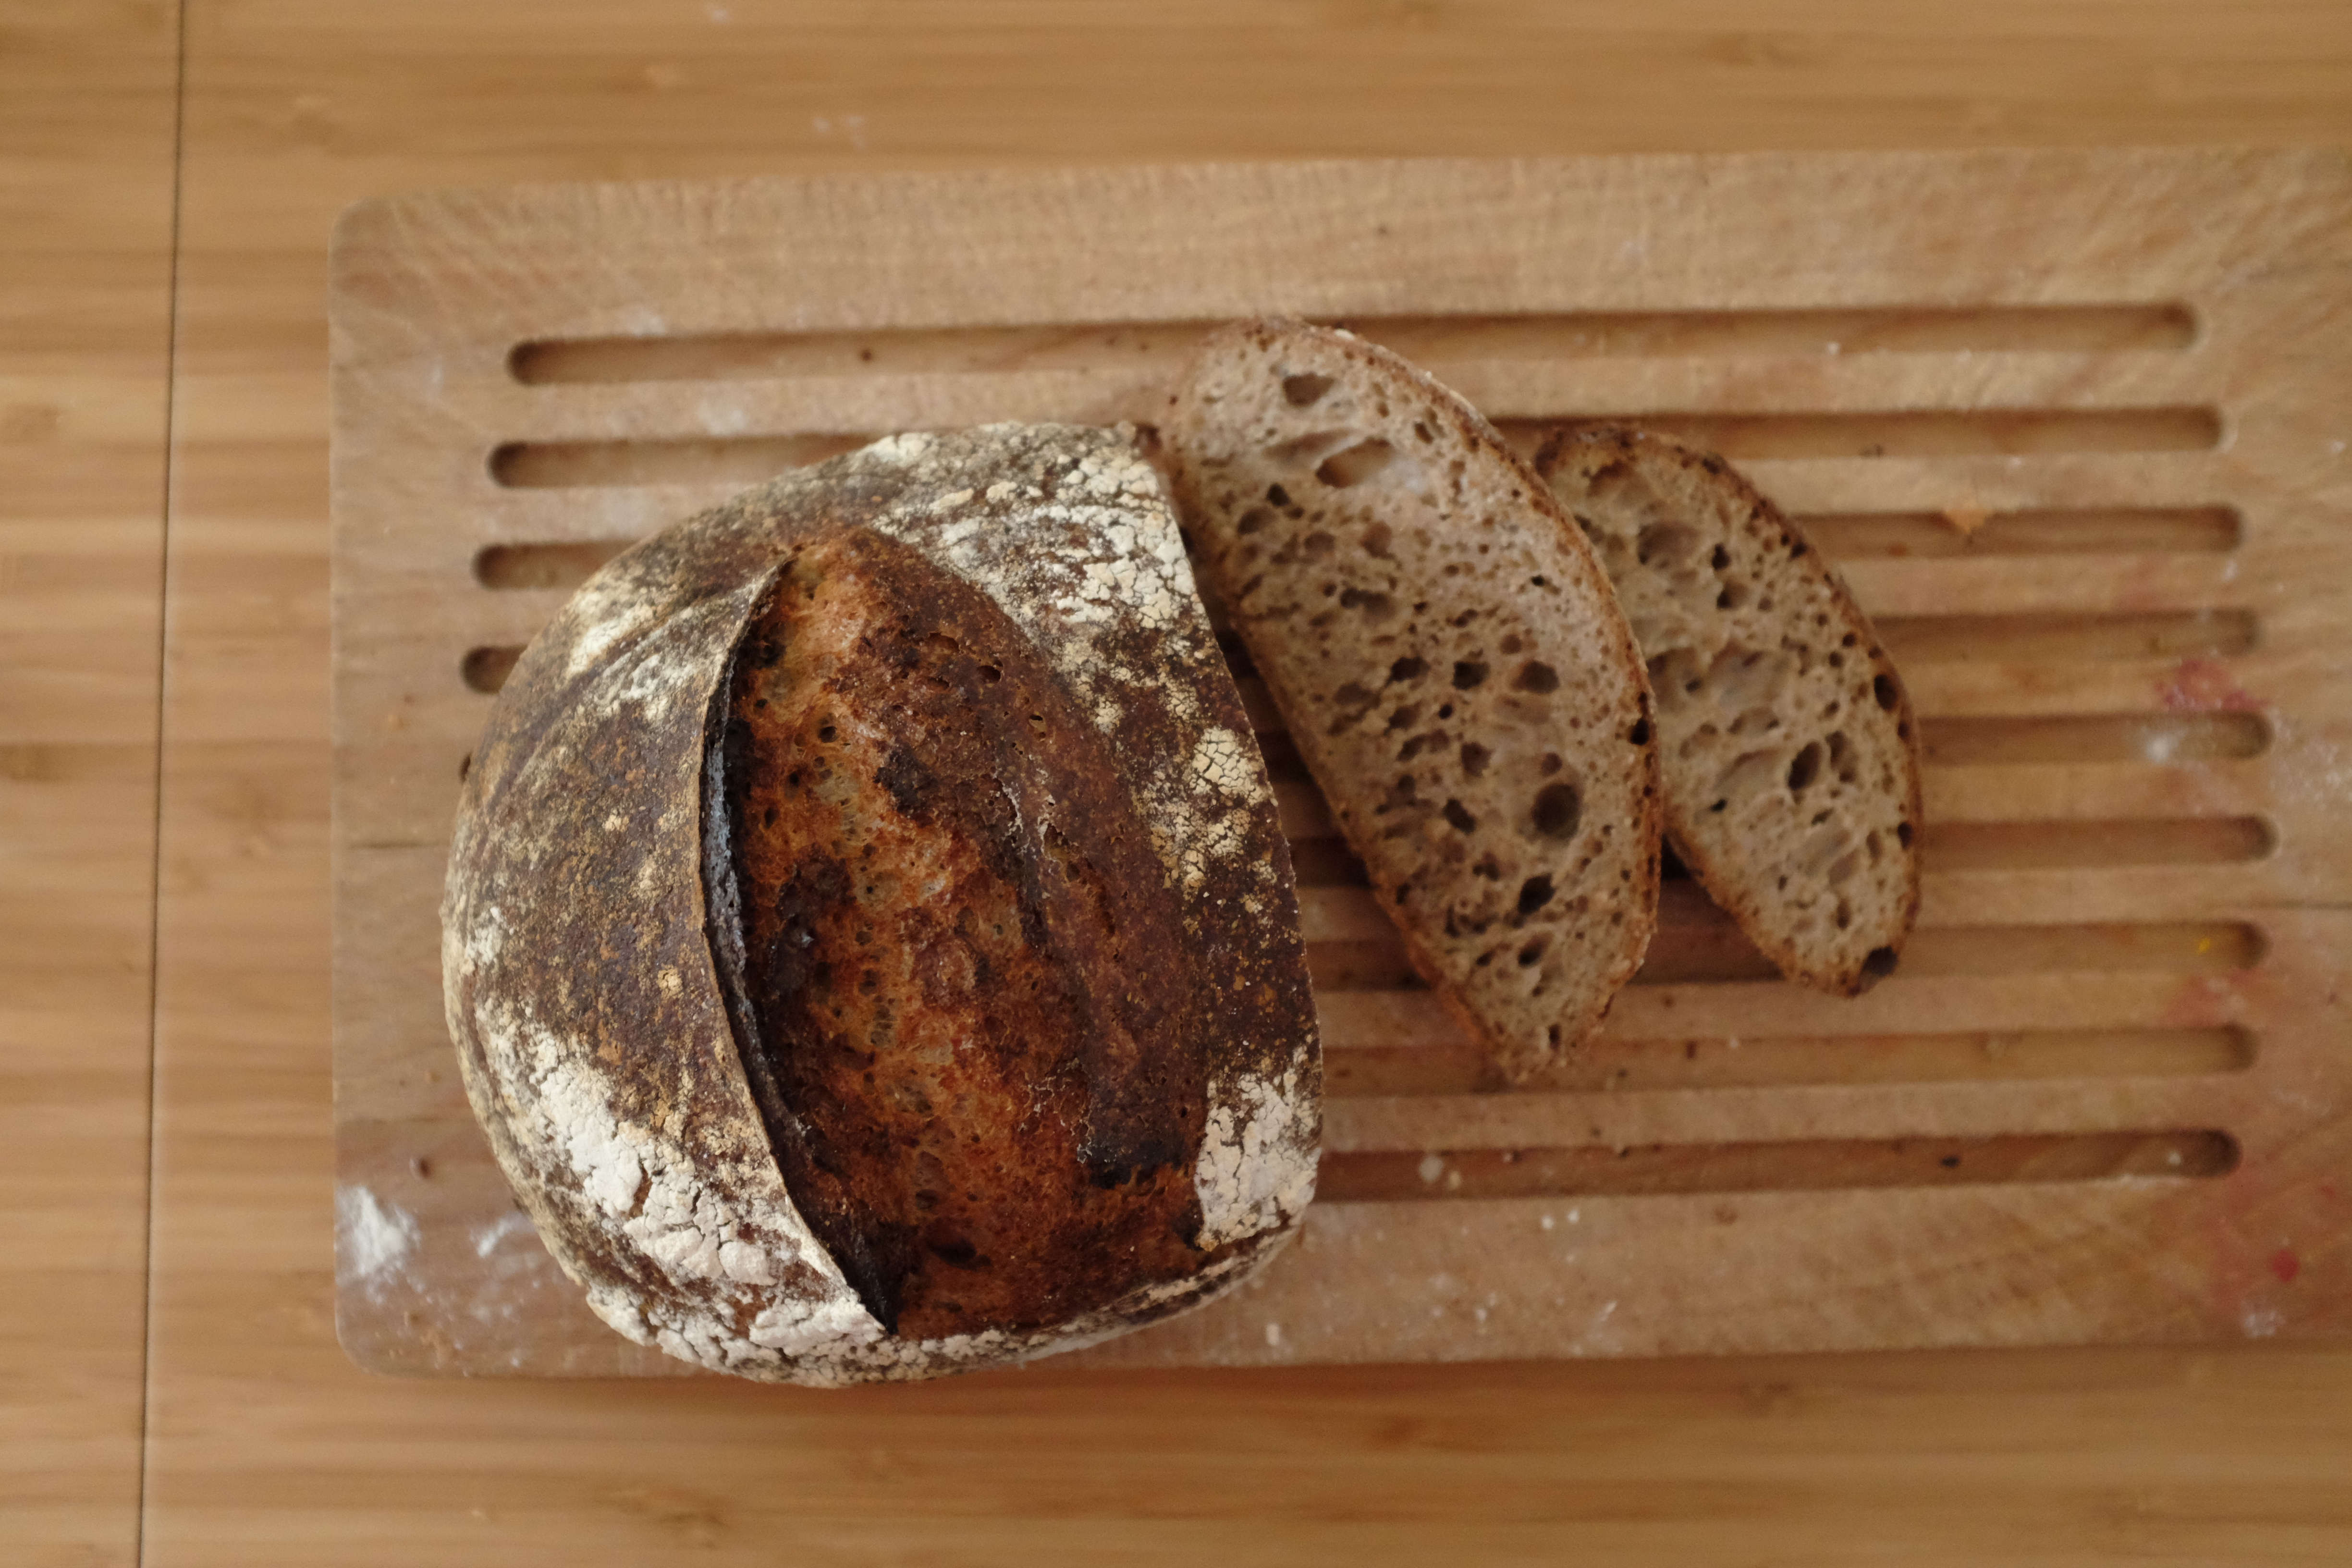 Two cut slices of the “Wholemeal Sourdough with a Splash of Rye (Again)” bread